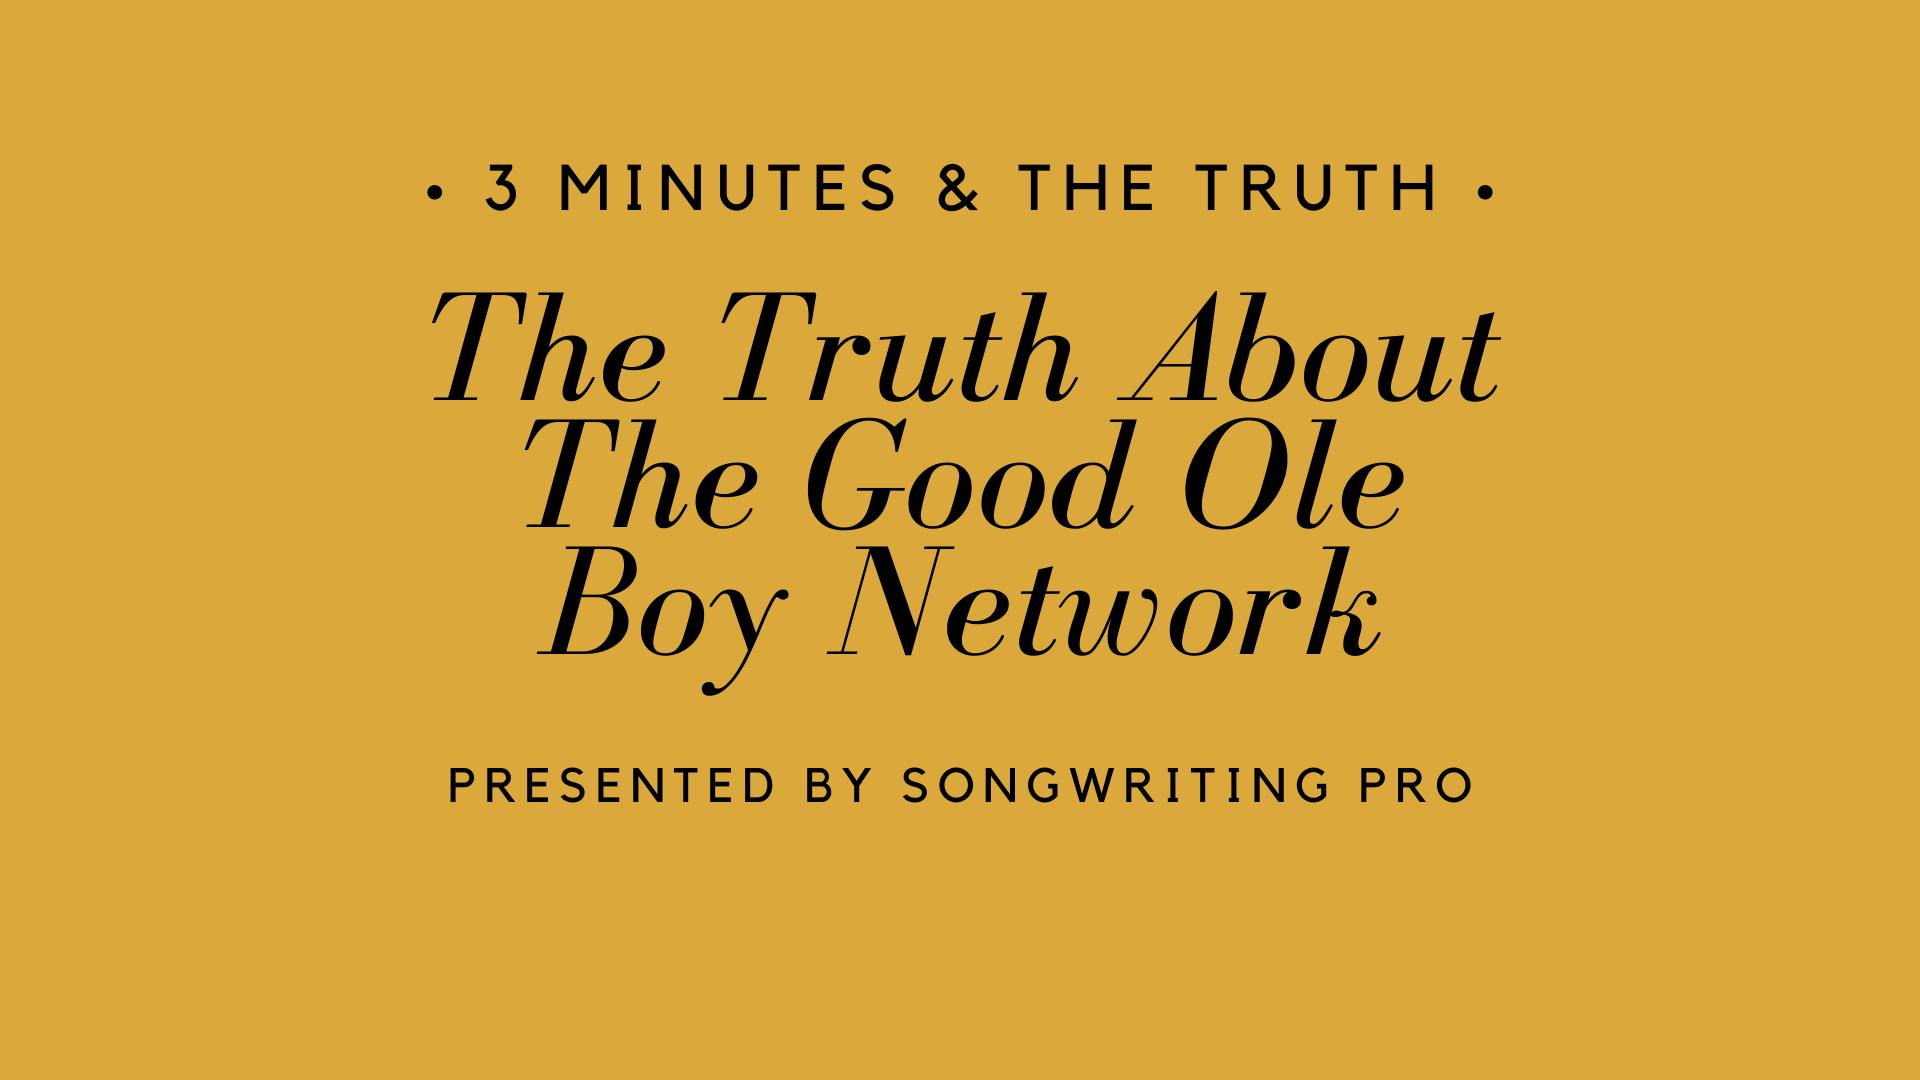 3 Minutes & The Truth: The Good Ole Boy Network